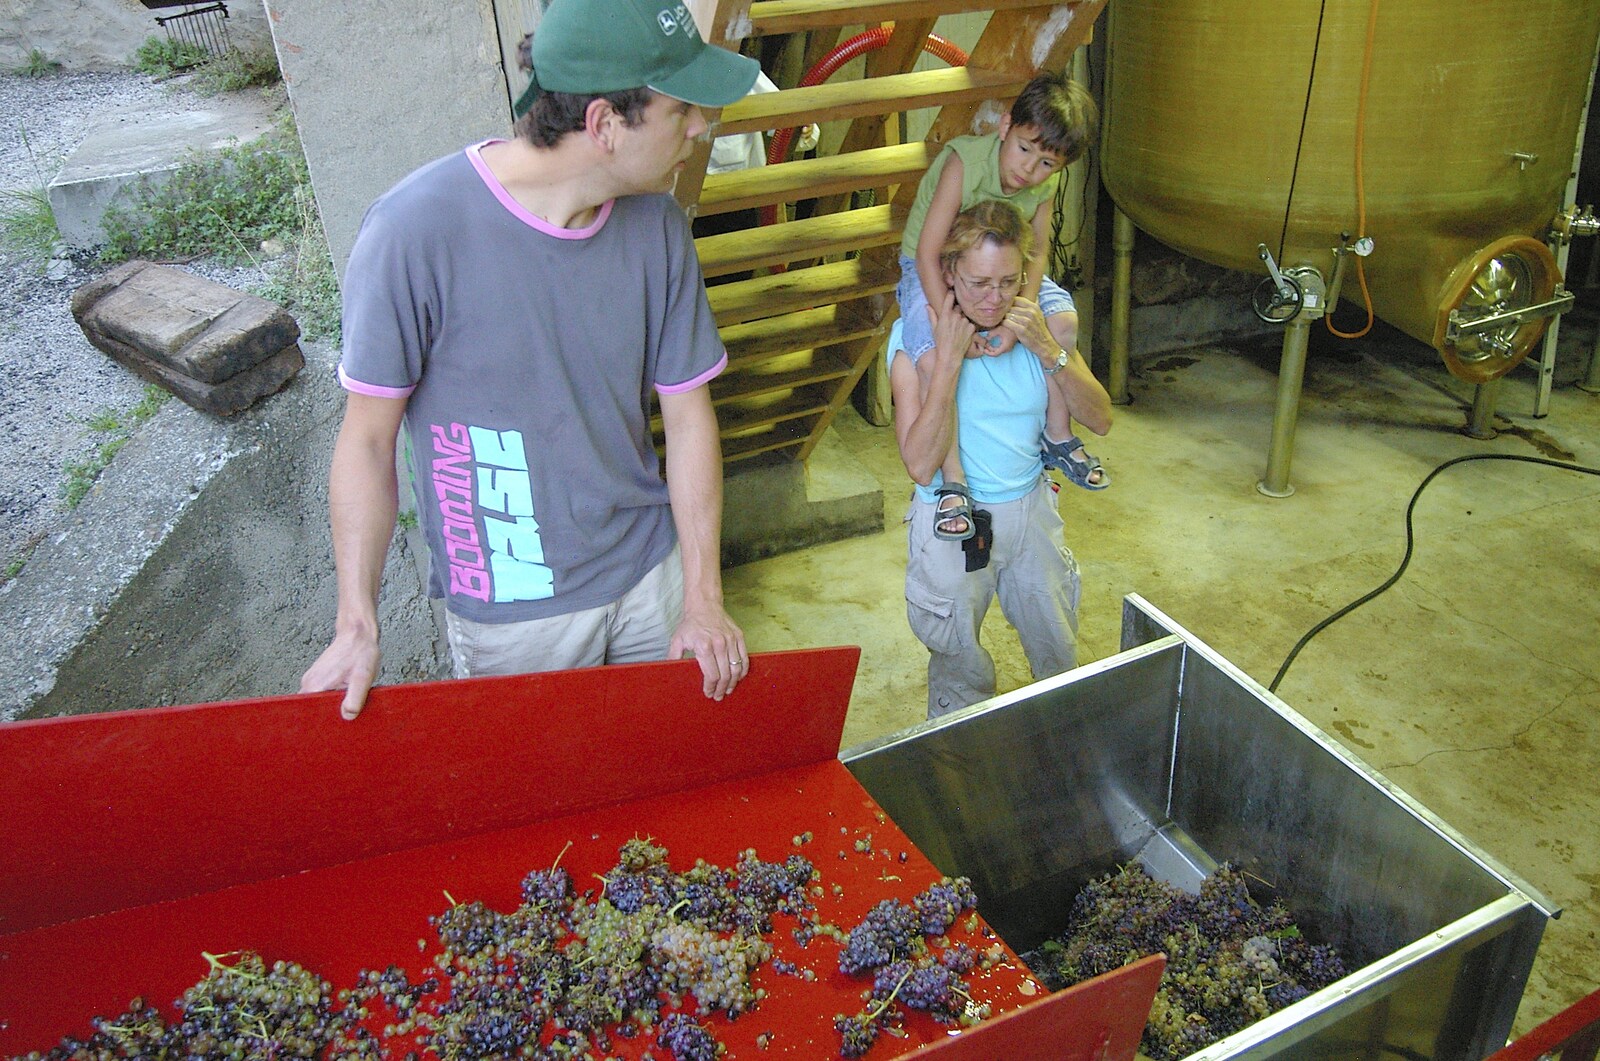 The grapes are unloaded from Grape Picking and Pressing, Roussillon, France - 19th September 2006